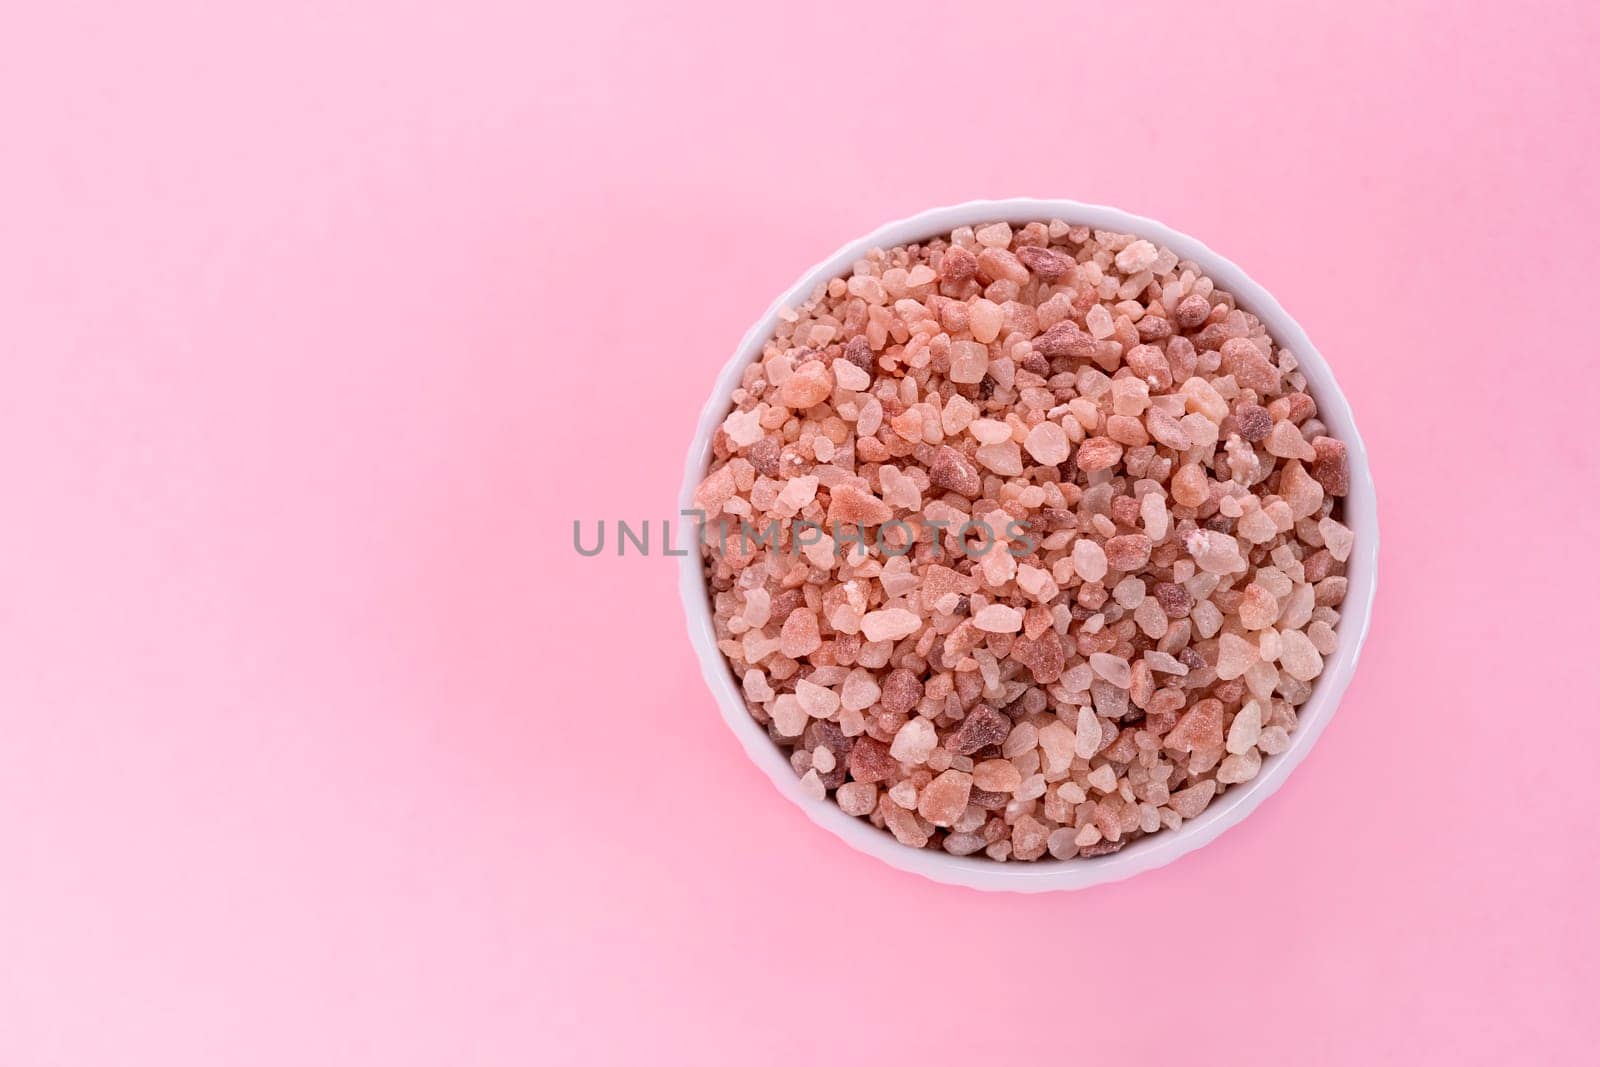 Mockup Pink Himalayan Rock Salt, Halite In White Ceramic Bowl On Pink Background. Top View Horizontal Plane, Copy Space For Text. High quality photo by netatsi